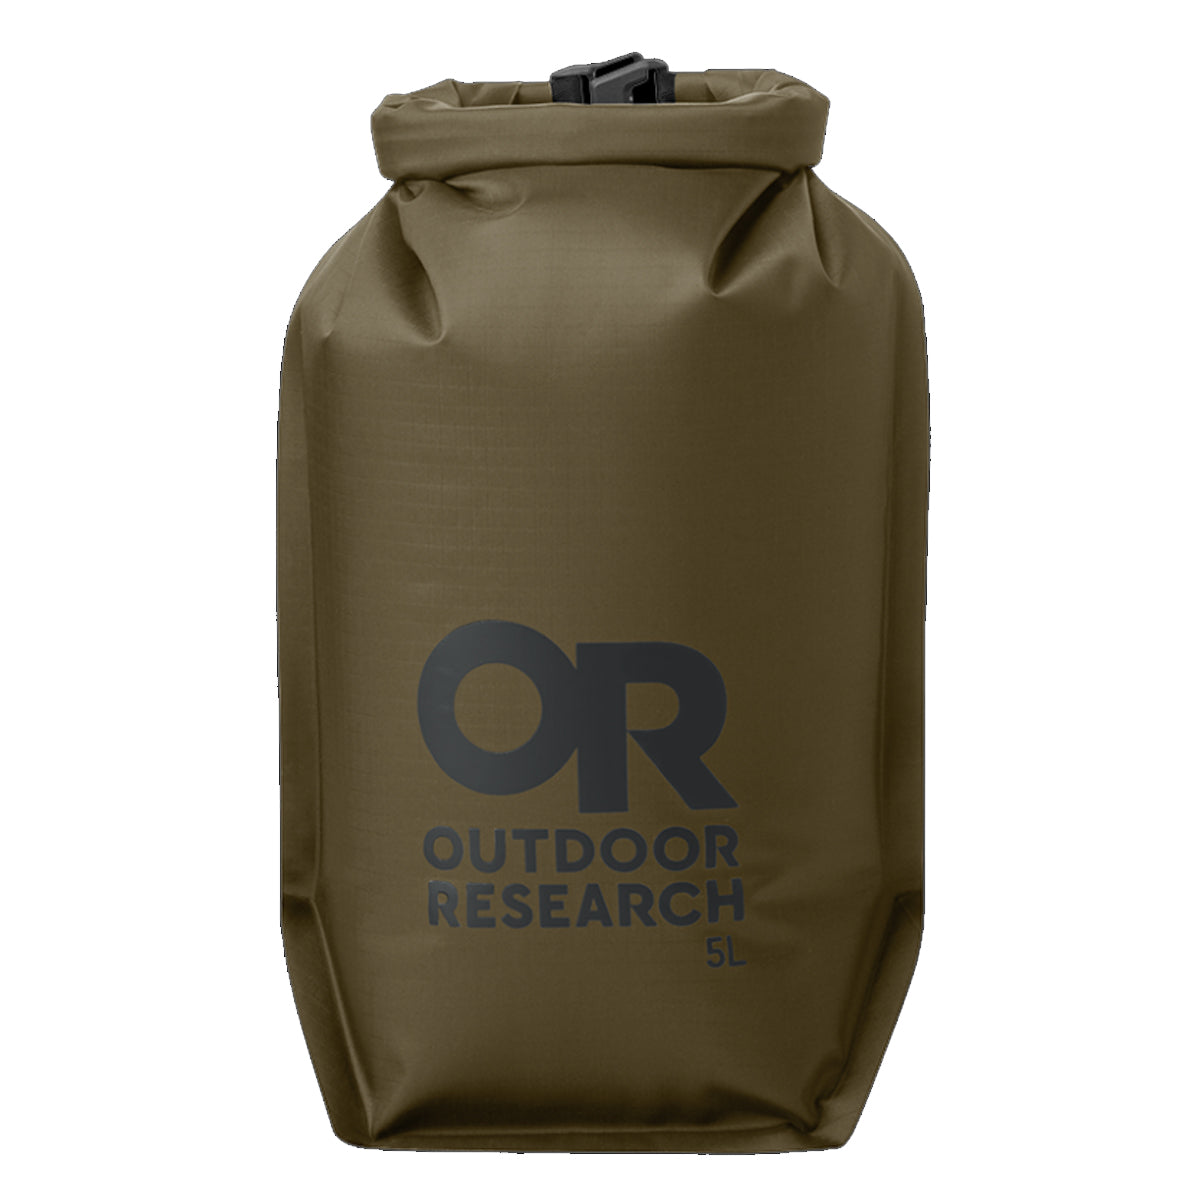 Outdoor Research CarryOut Dry Bag in  by GOHUNT | Outdoor Research - GOHUNT Shop